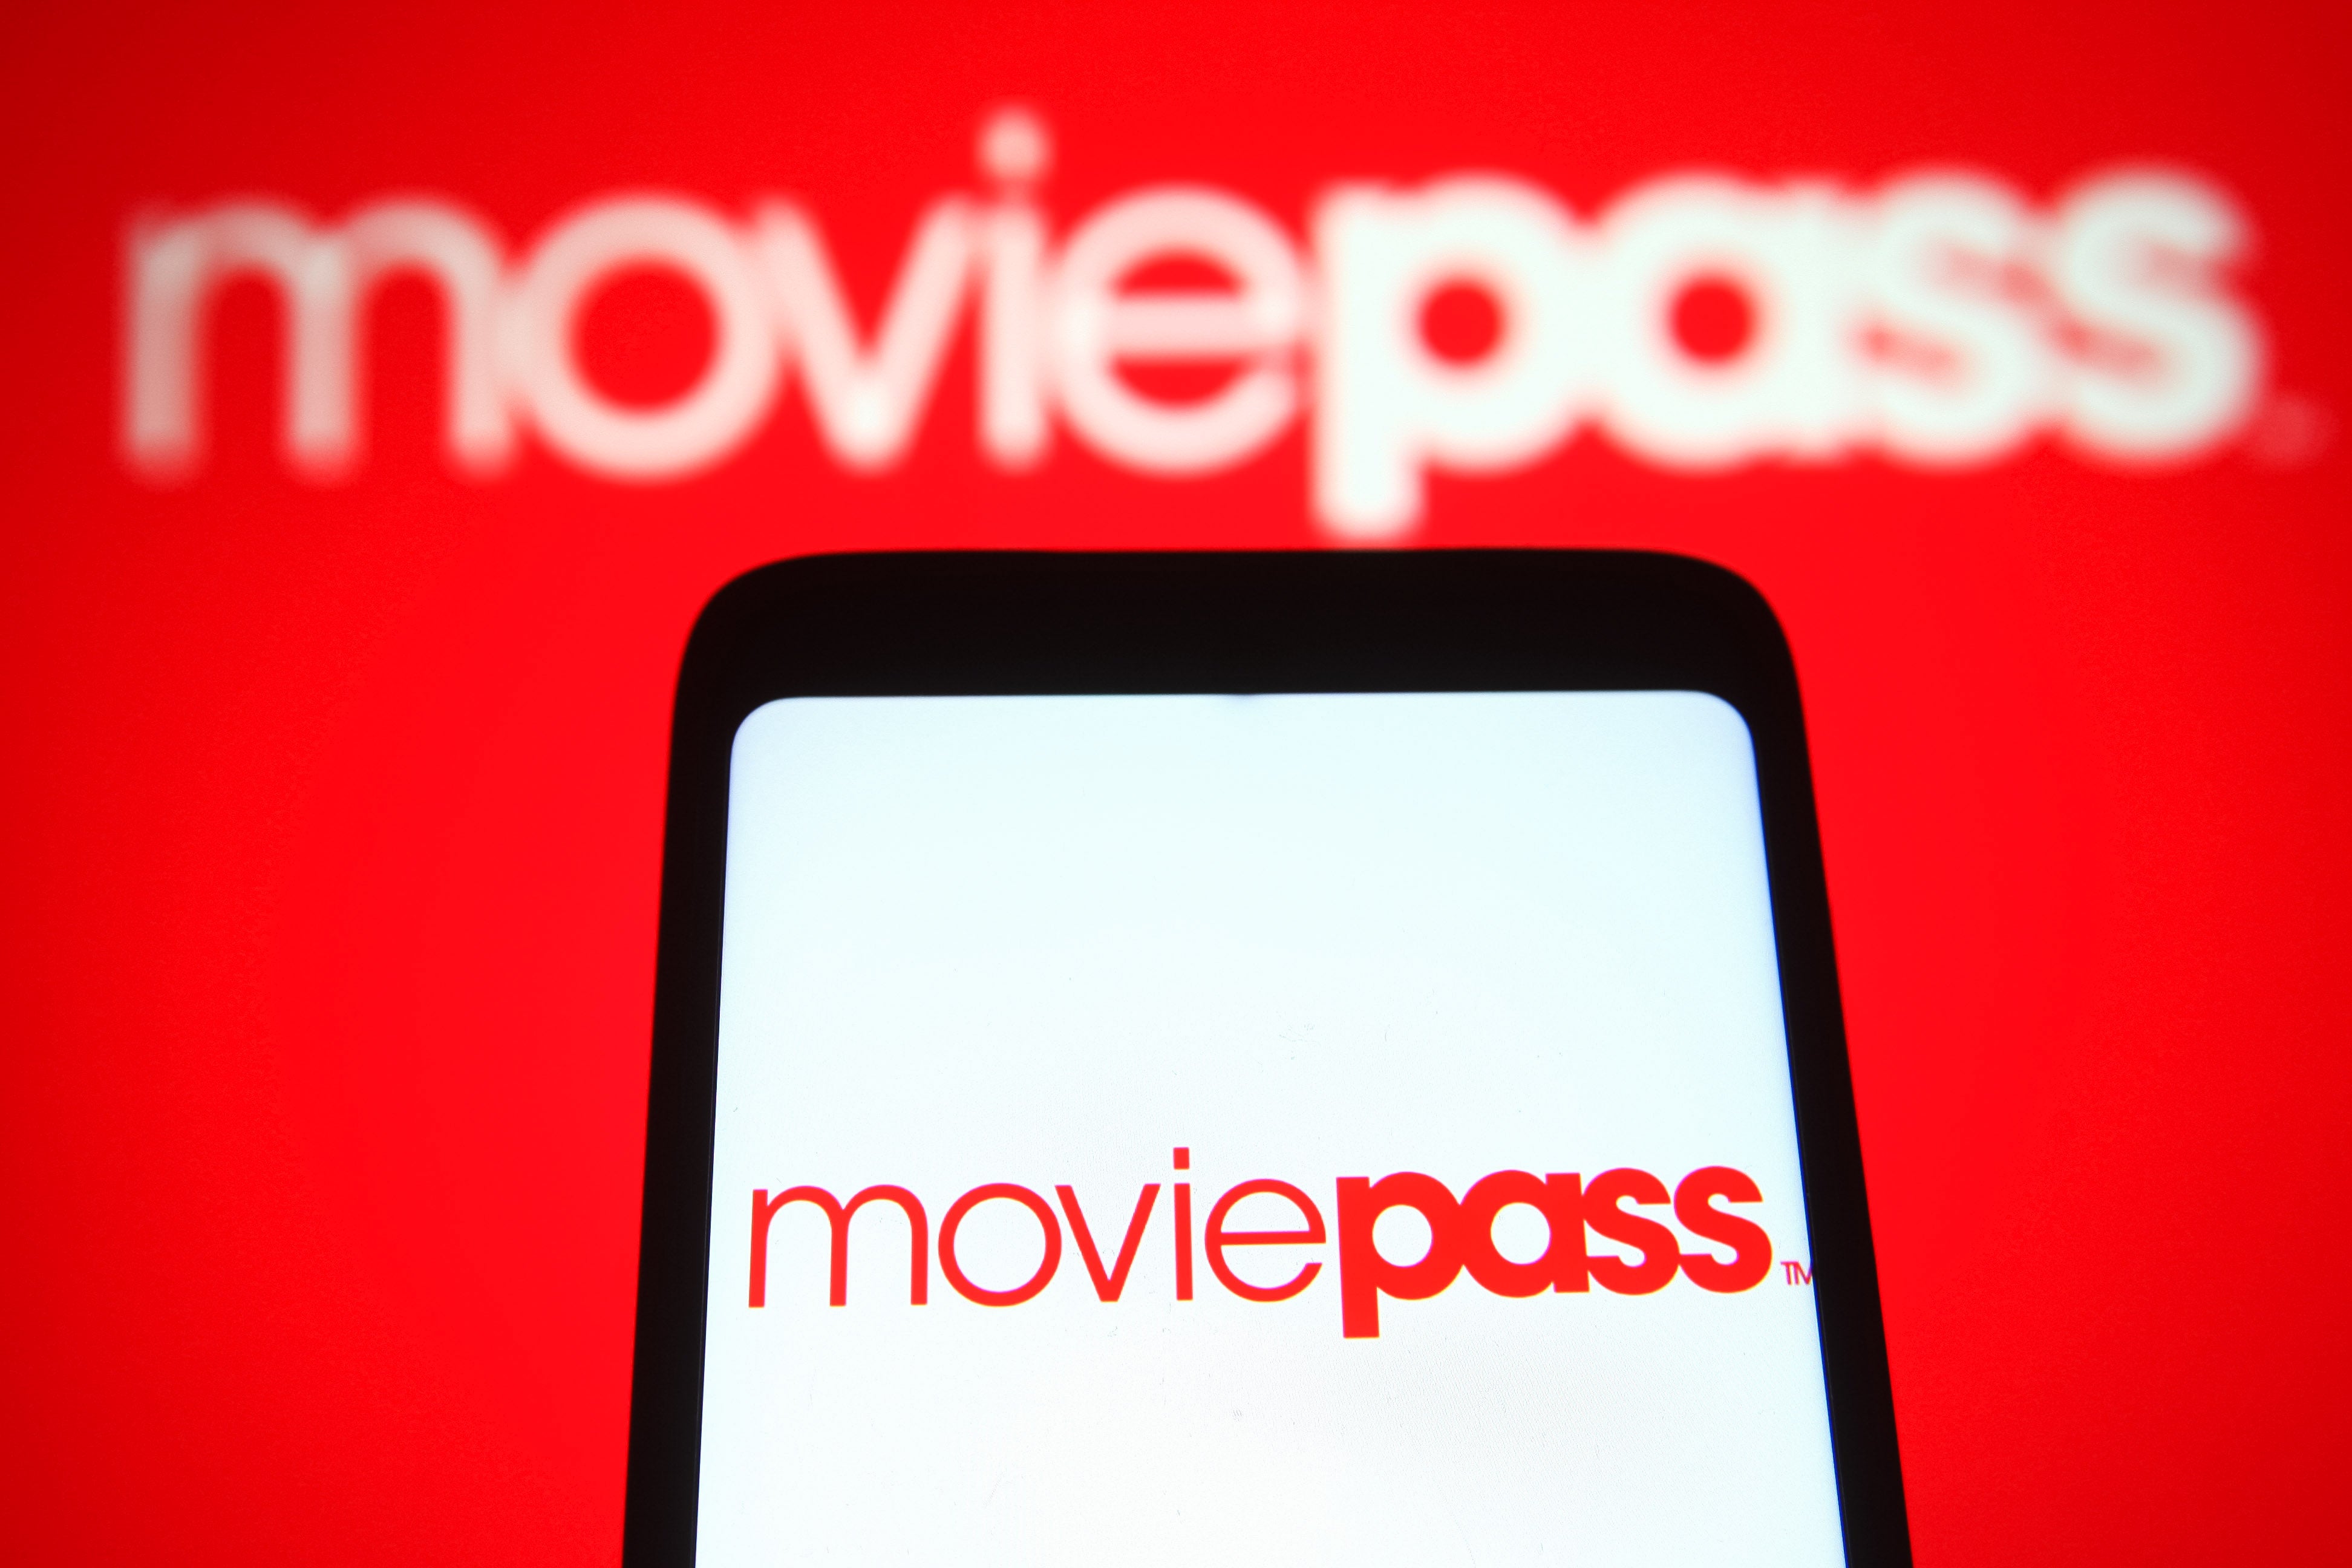 The MoviePass logo, on a smartphone.